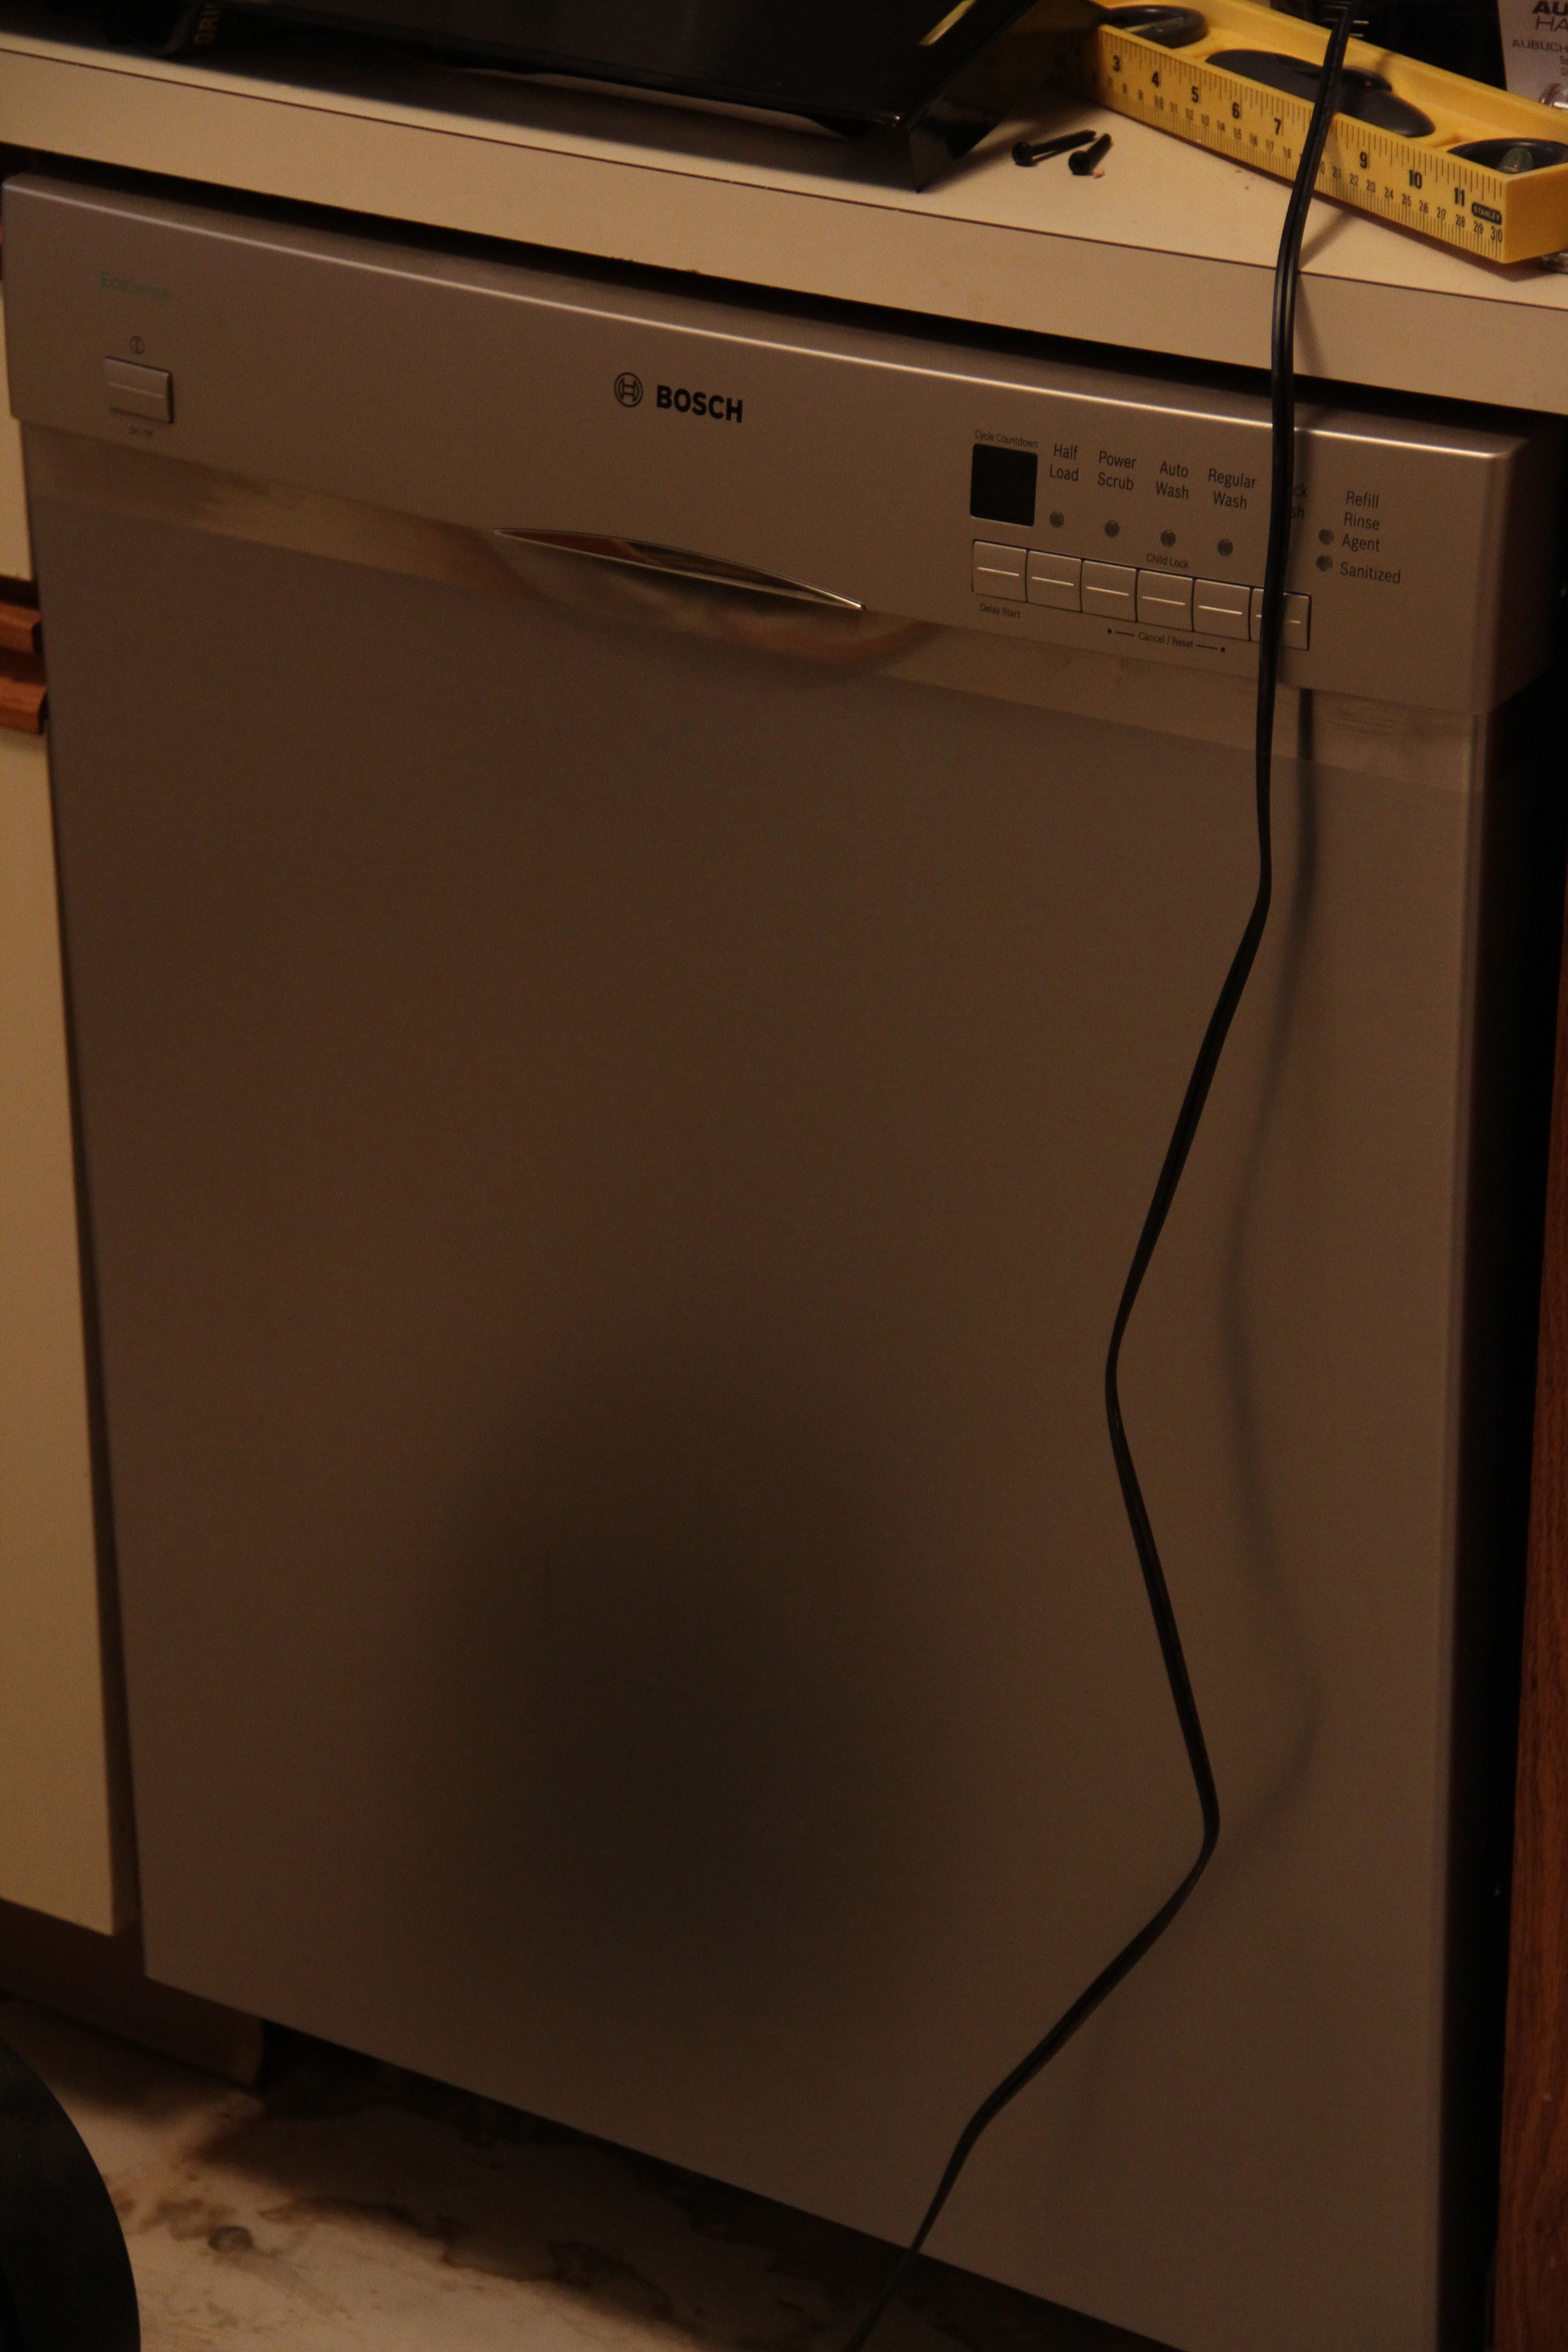 Jeff installed the dishwasher. I think this is the third or fourth one he's done. He's quite versatile.